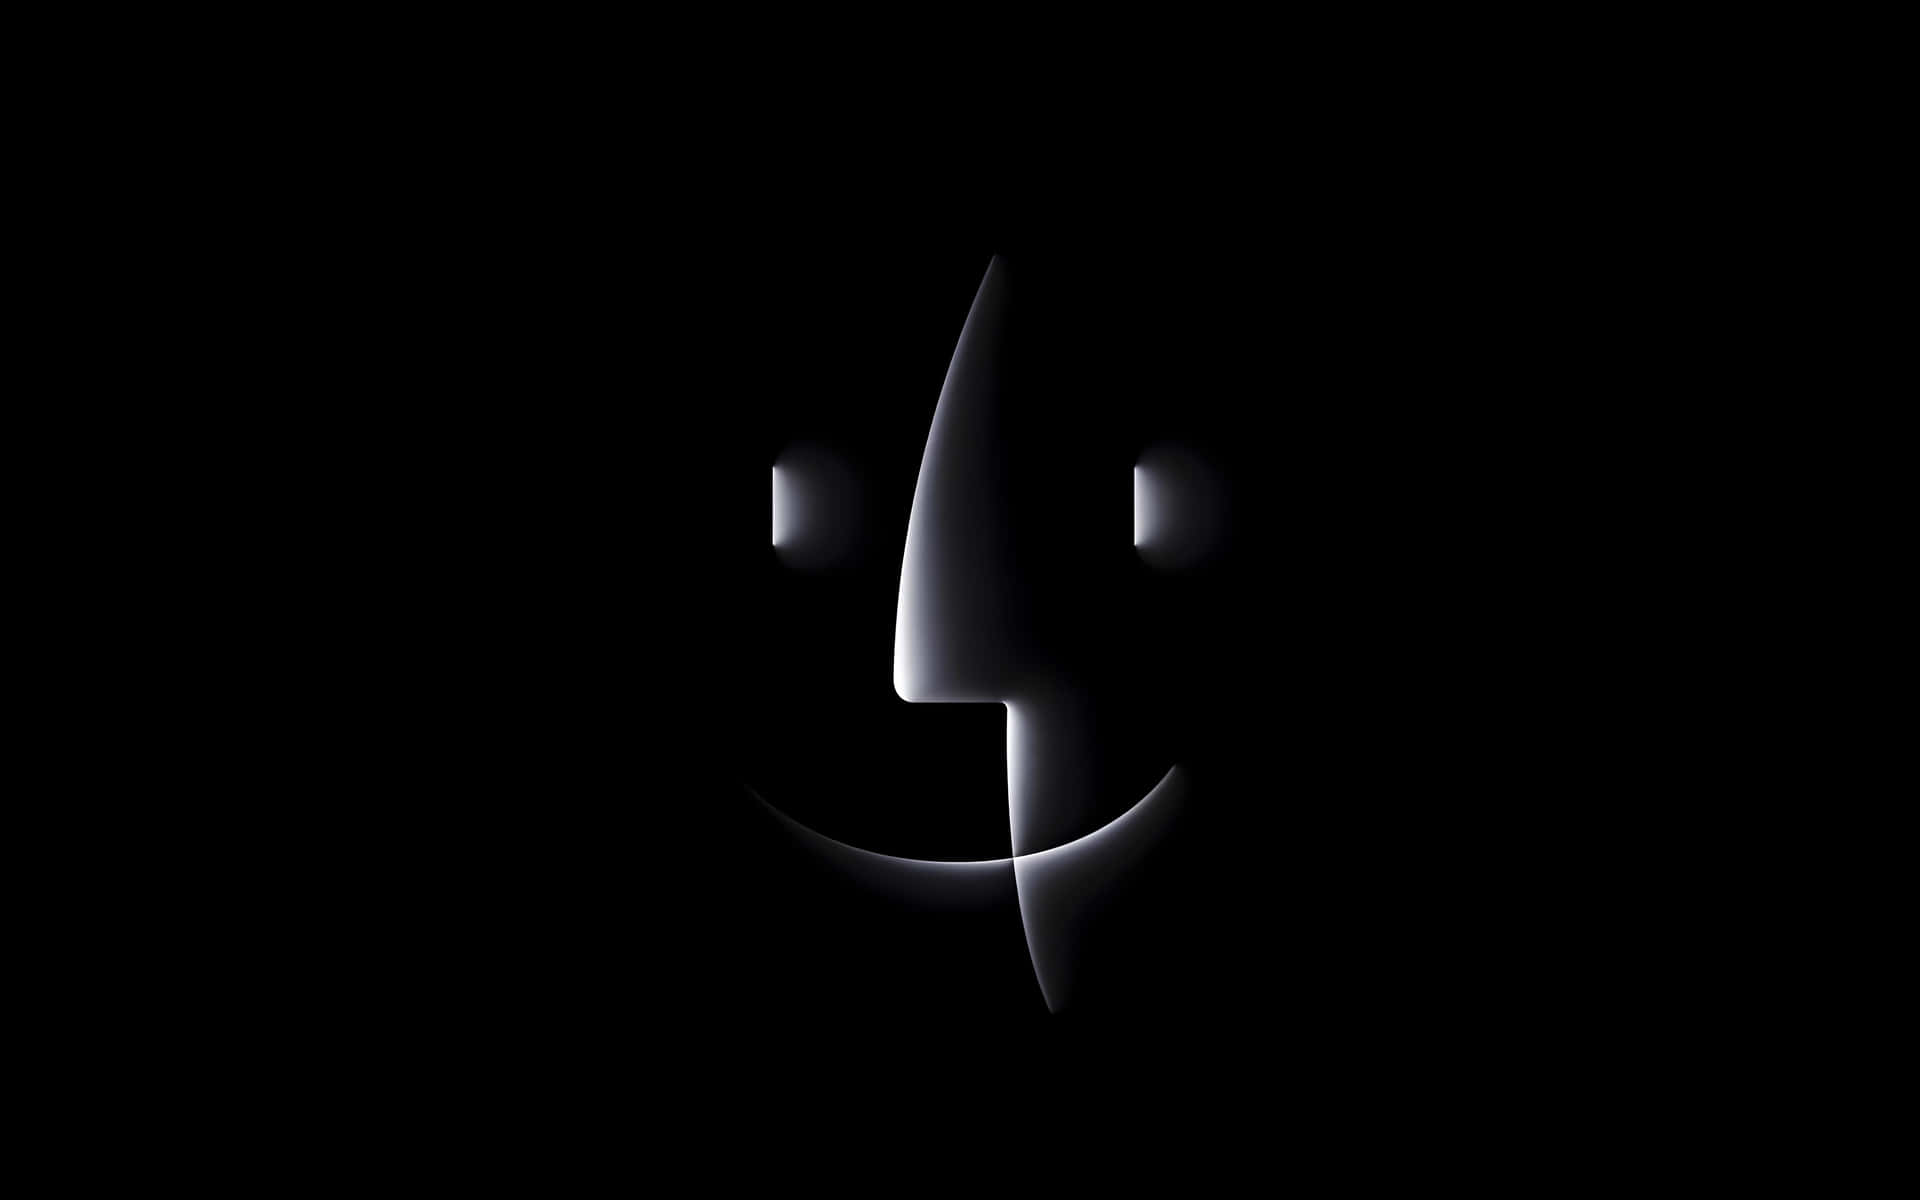 Mysterious Smiley Face Abstract Wallpaper